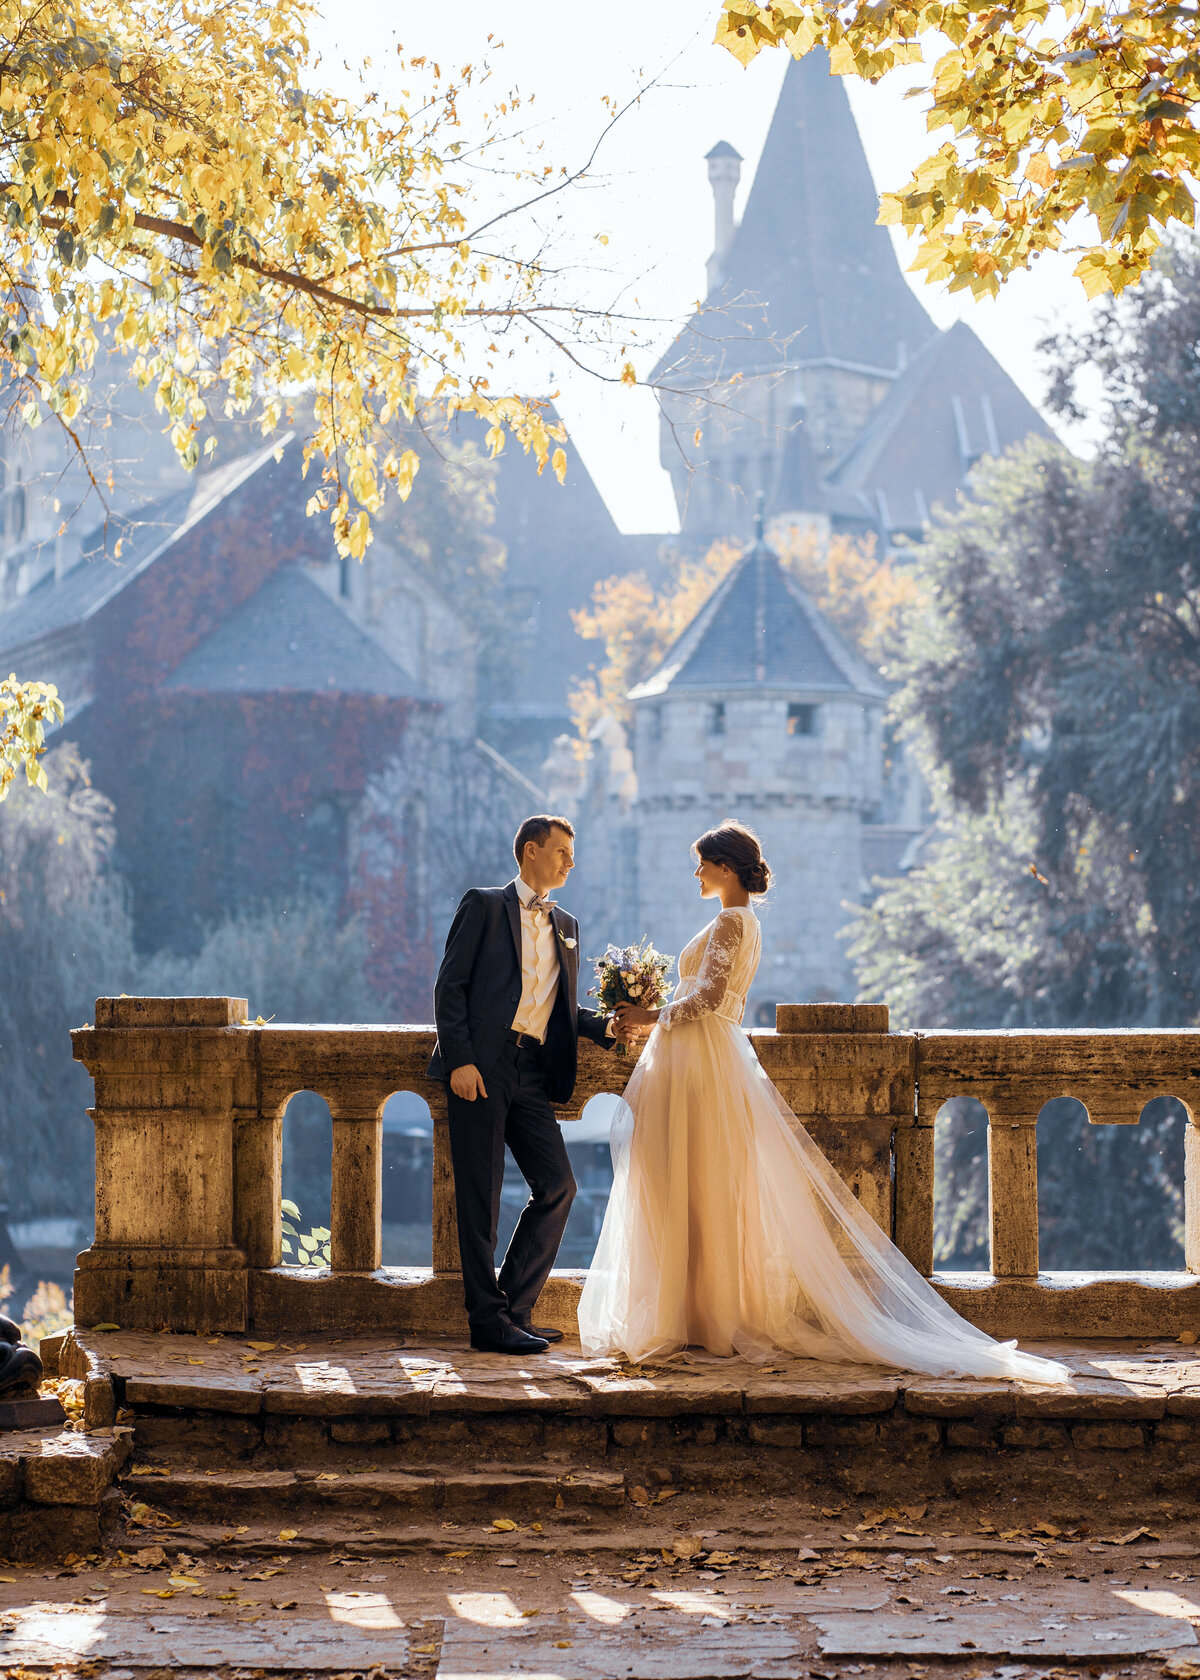 A bride with an organza wedding dress and groom stand in front of a castle in Switzerland.